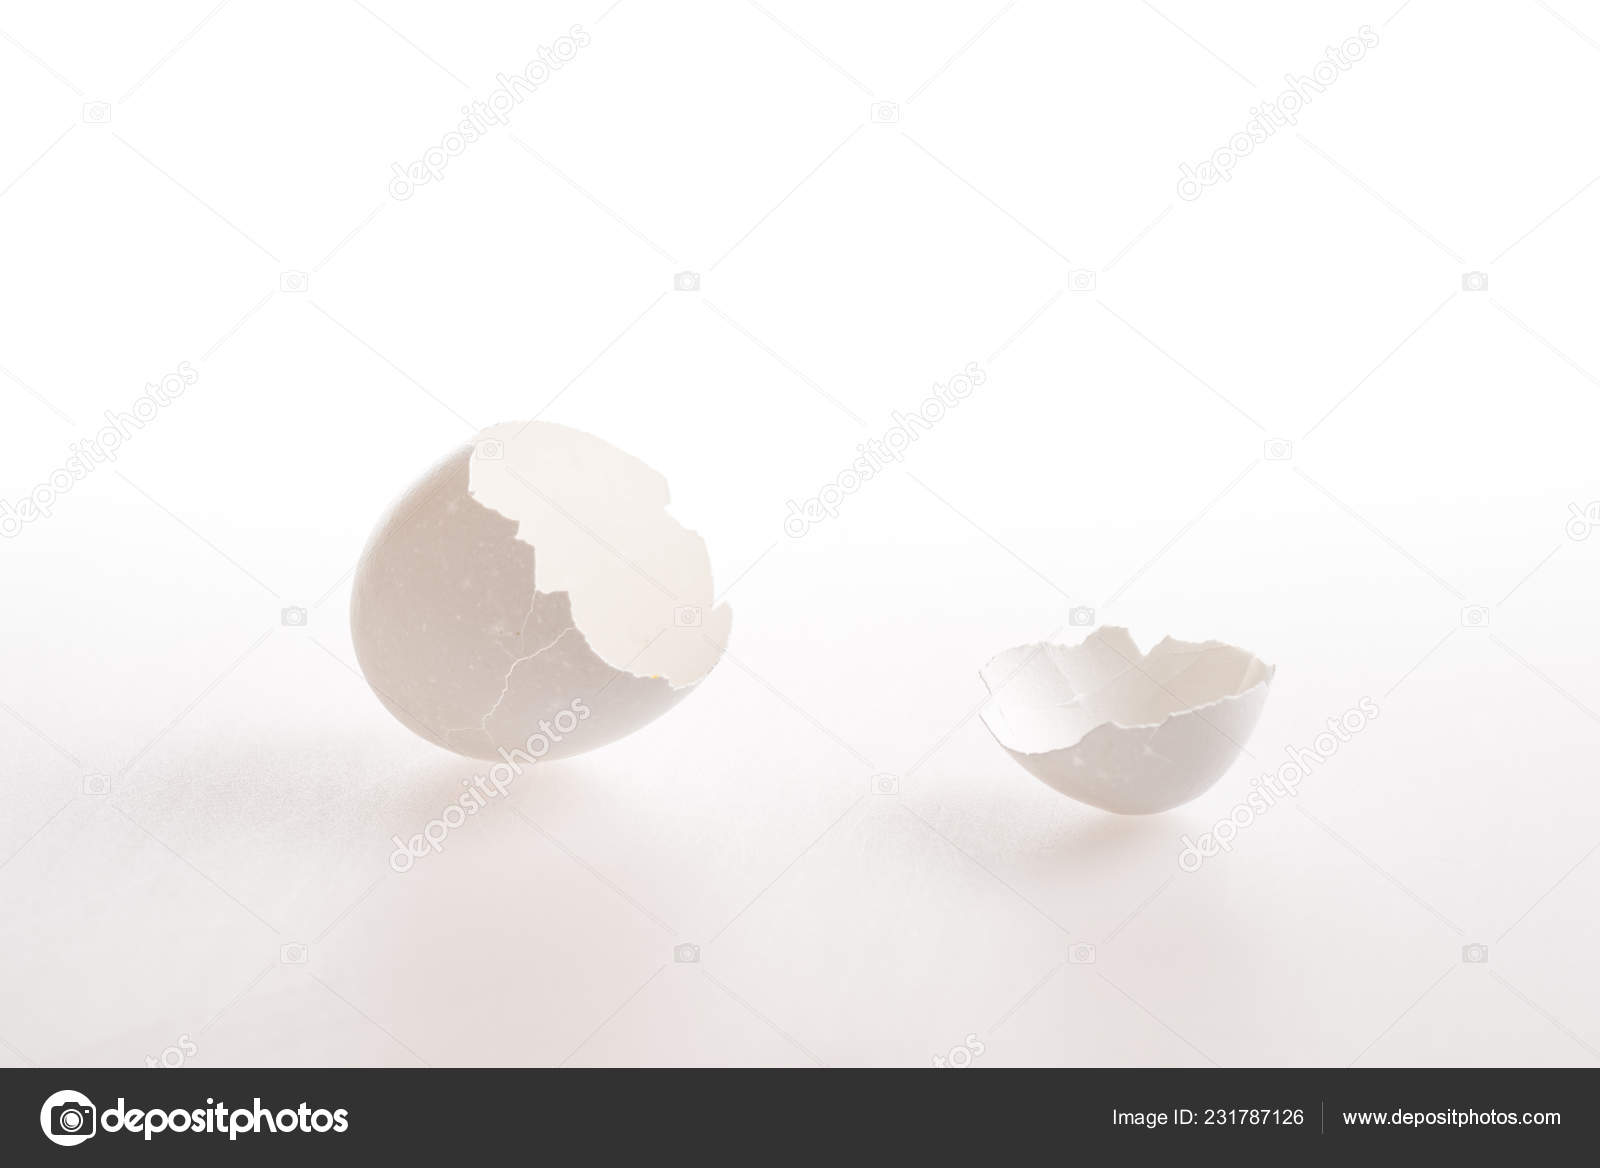 A broken white egg shell with cracks isolated on a white background and with copy space.